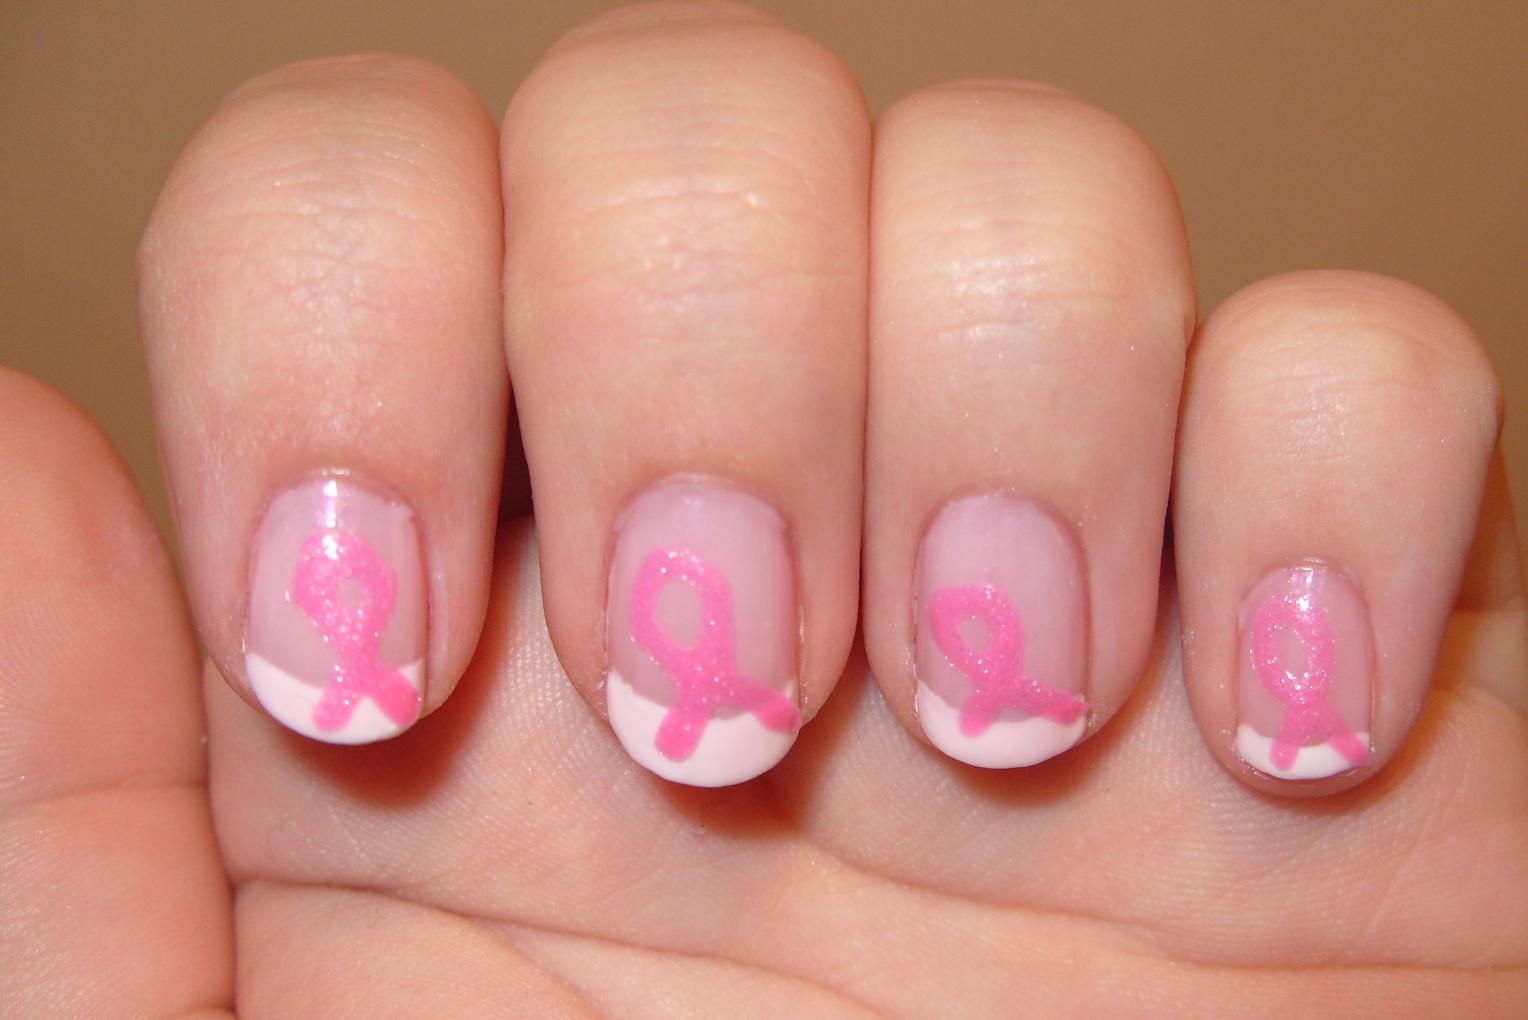 3. How to Create Nail Art Ribbons for Breast Cancer Awareness - wide 6